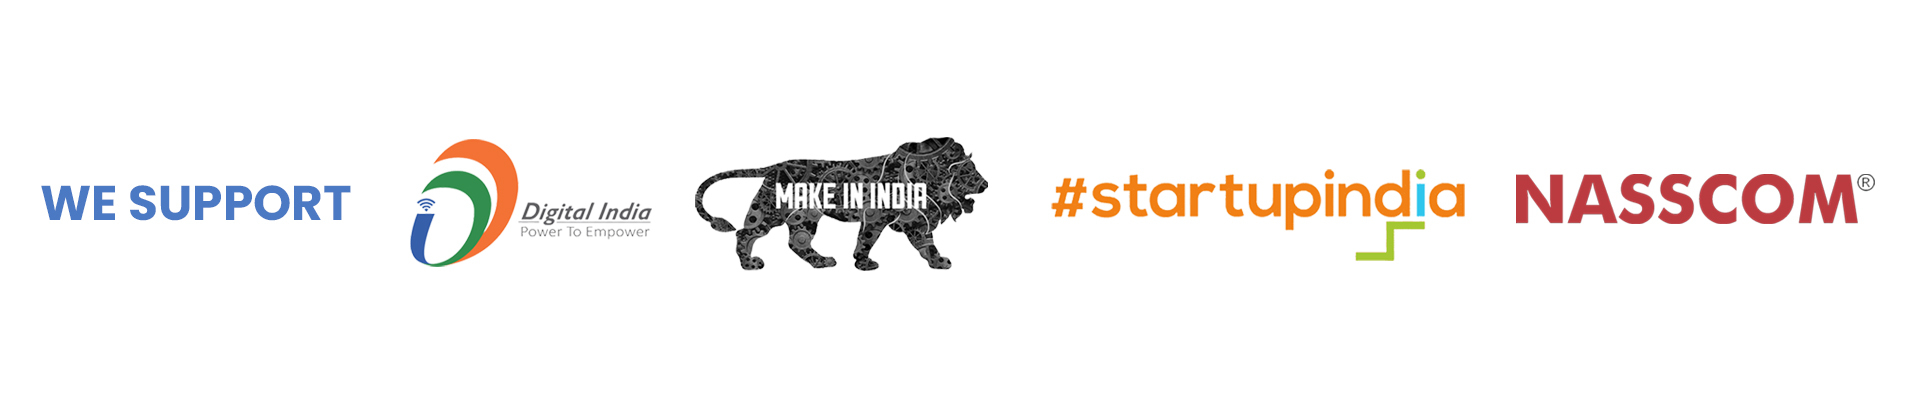 At Legalo, we support - Make in India, Startup India, Digital India